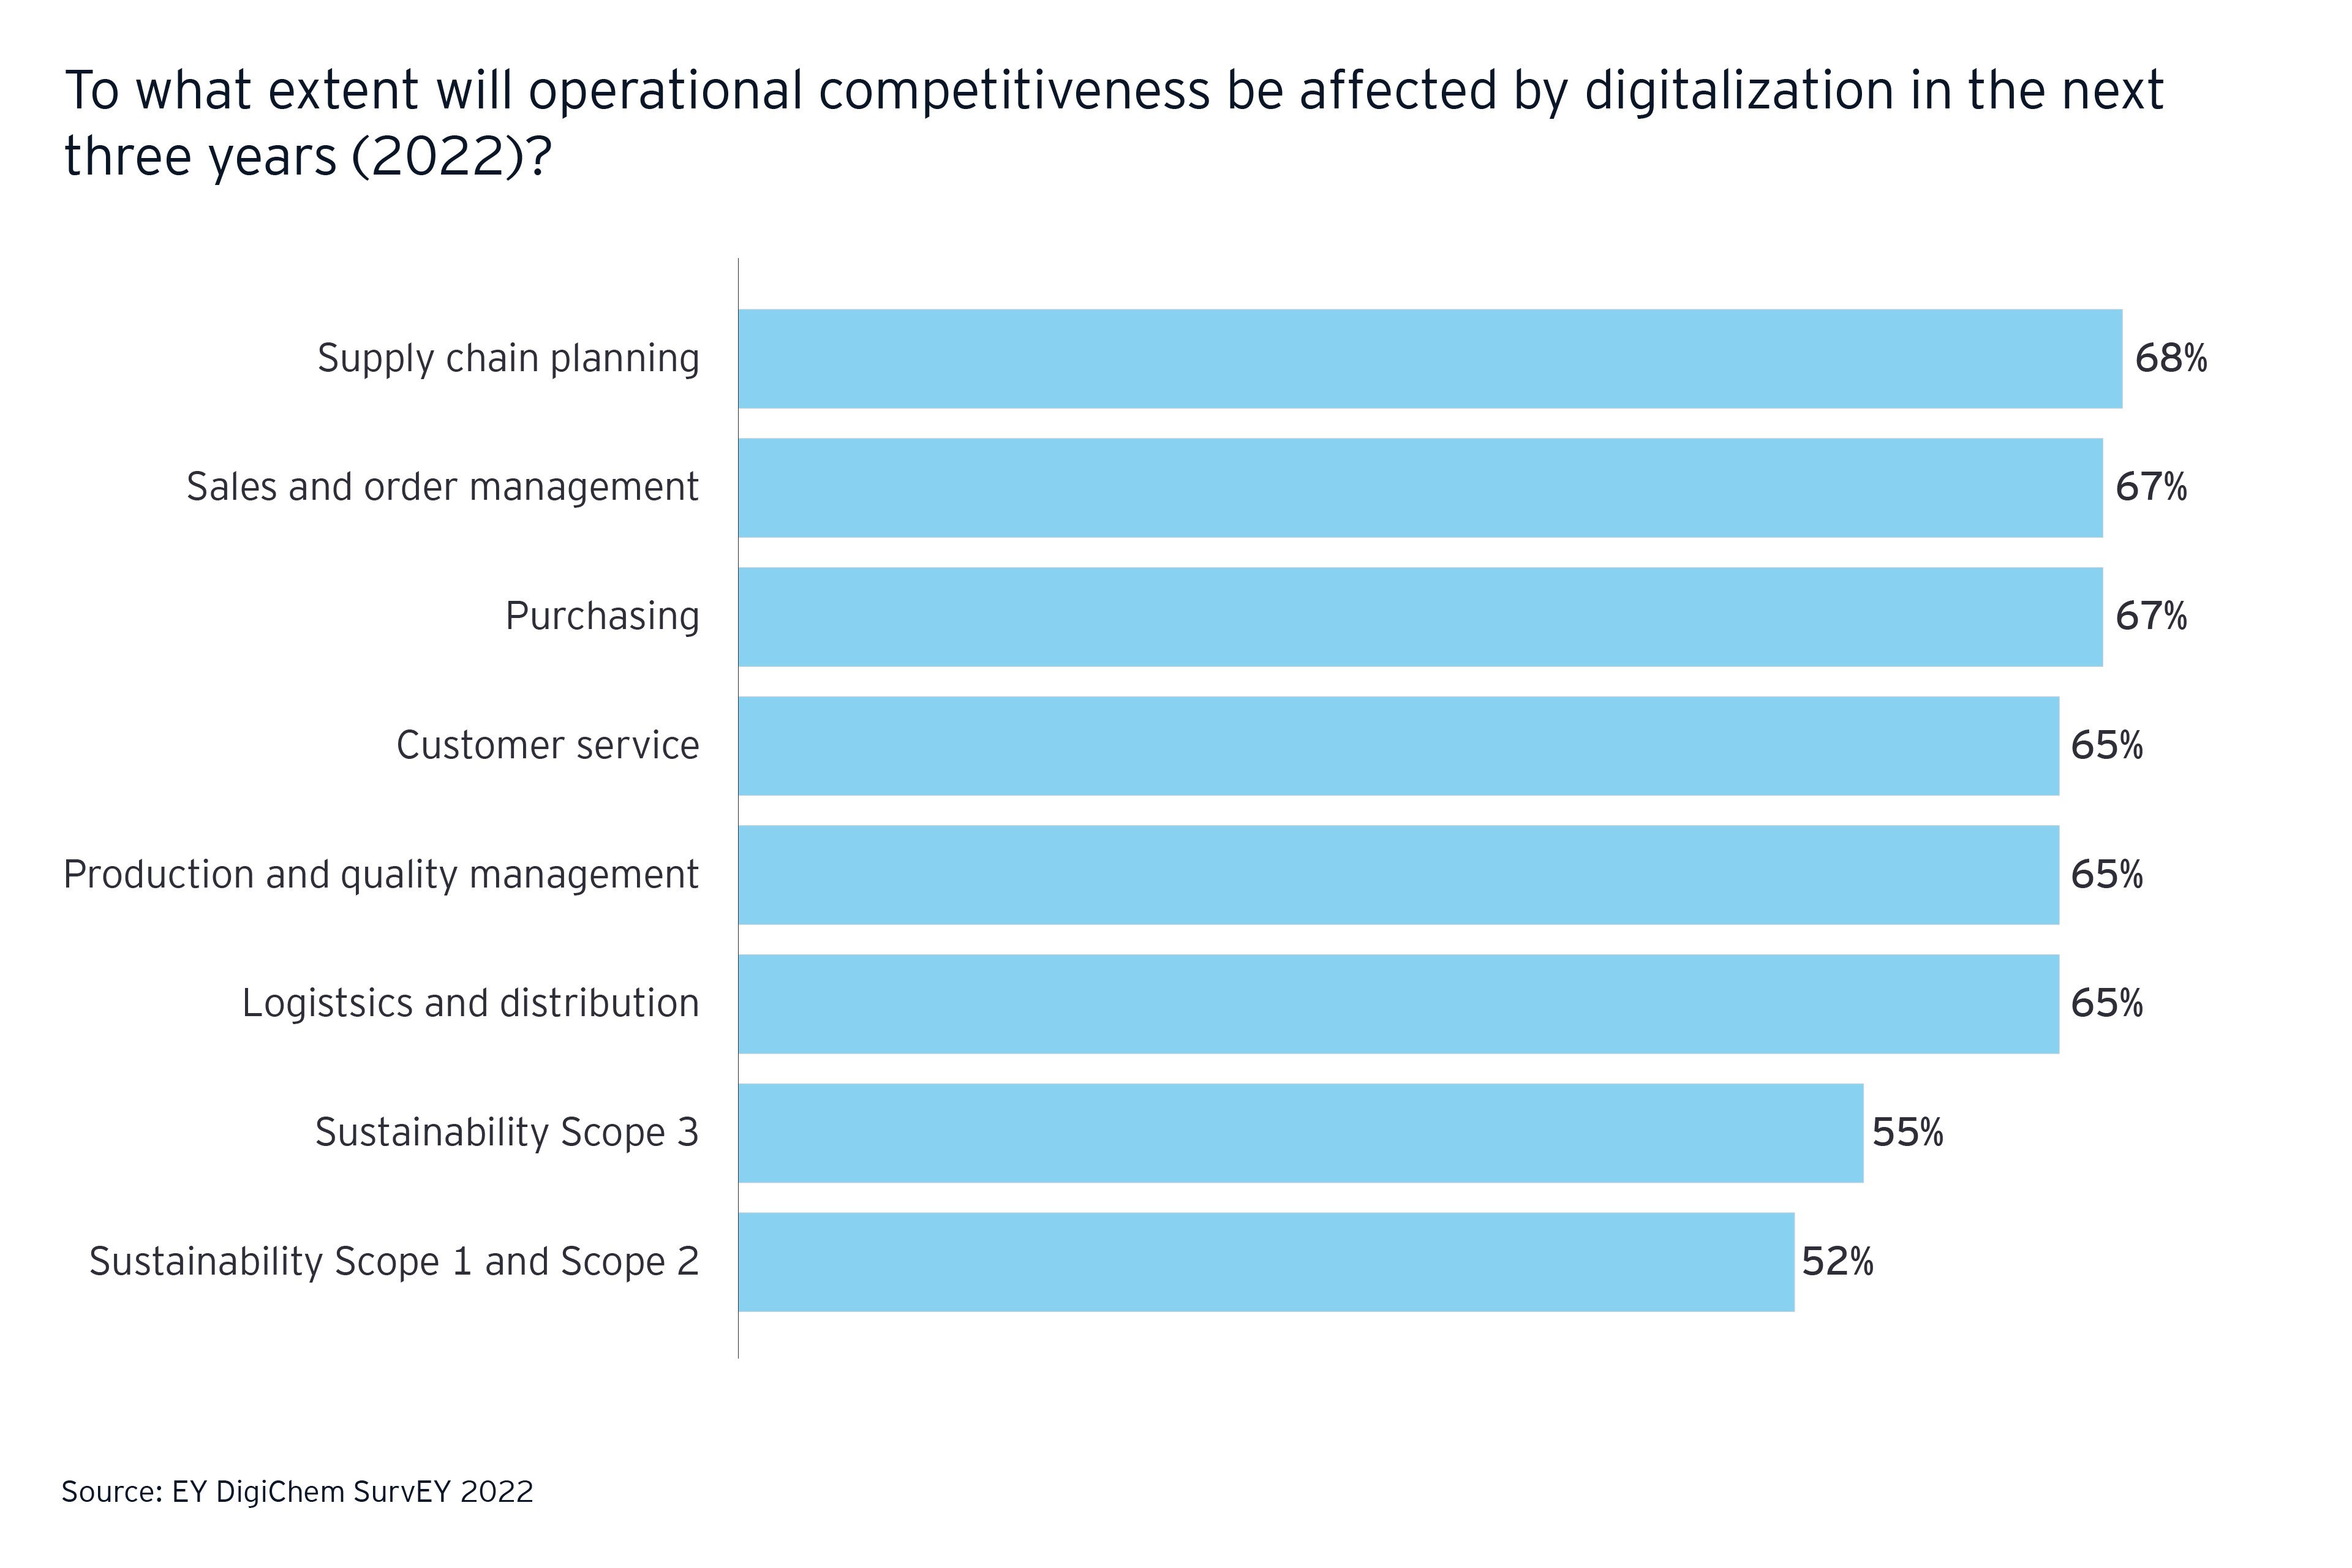 Effects of digitalization on operational competitiveness